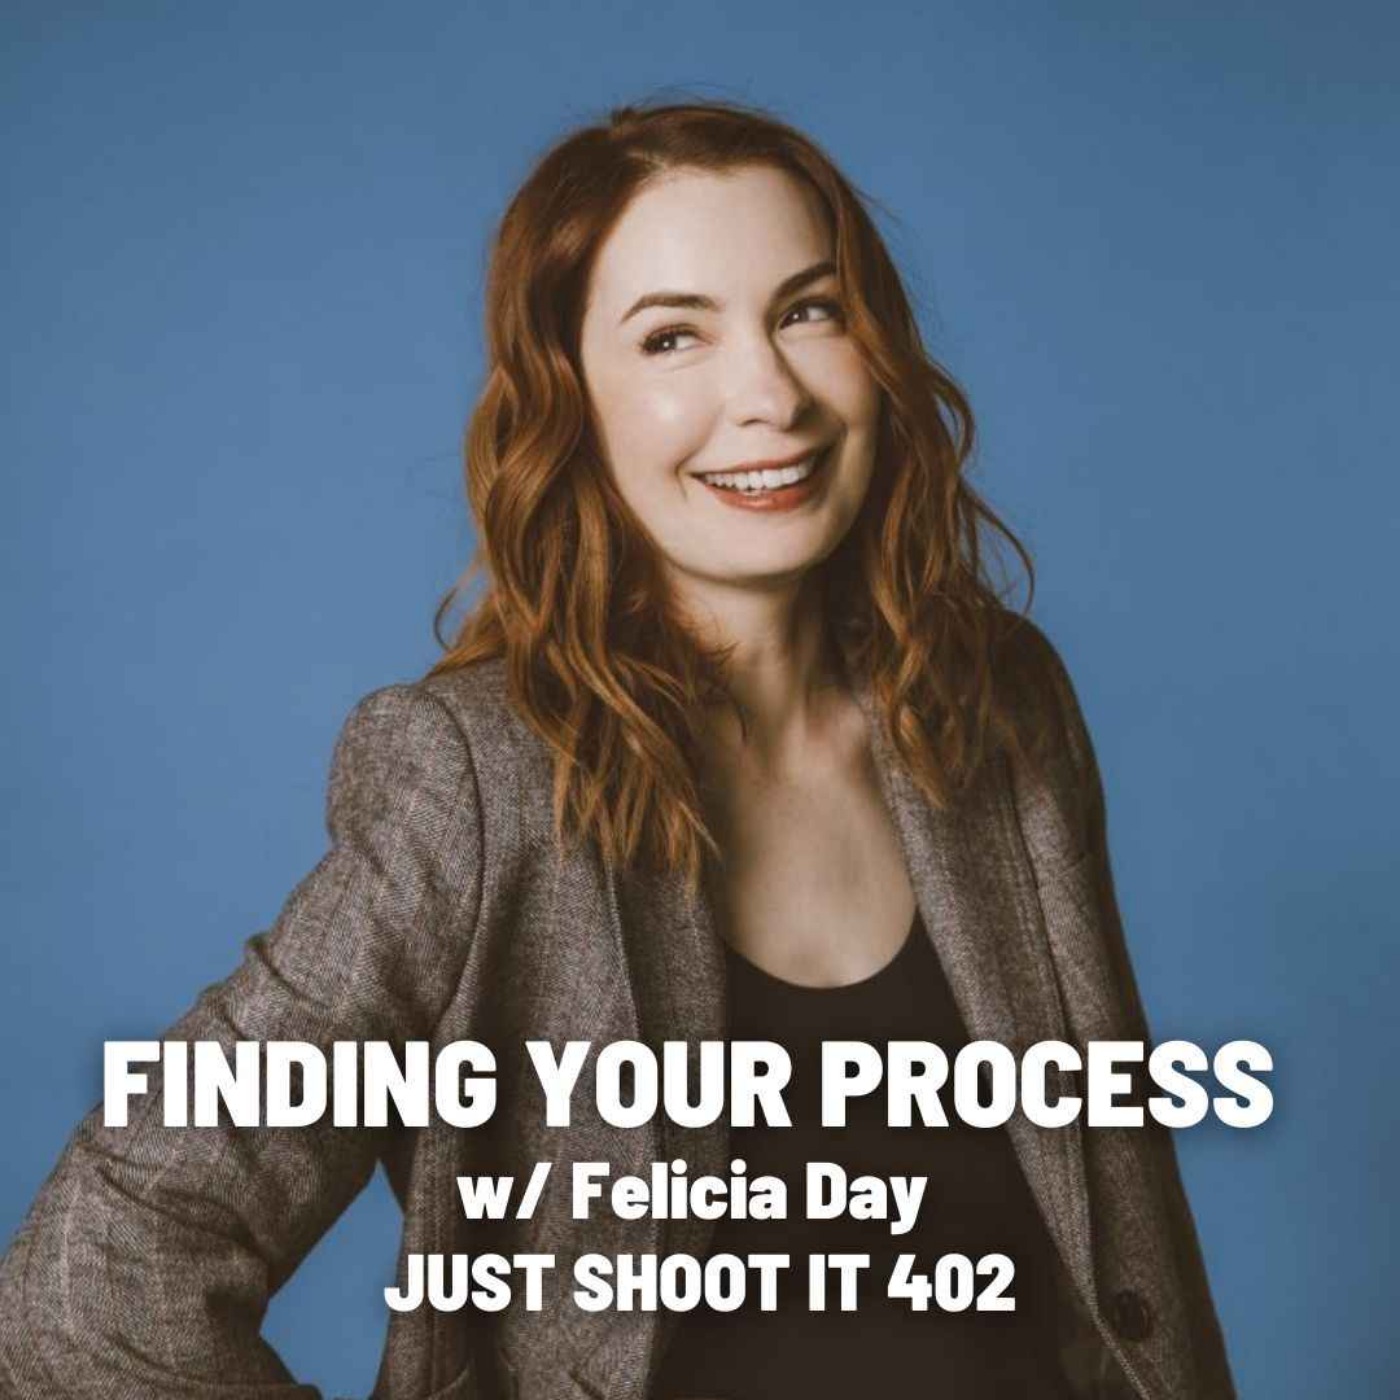 Finding Your Process w/Felicia Day - Just Shoot It 402